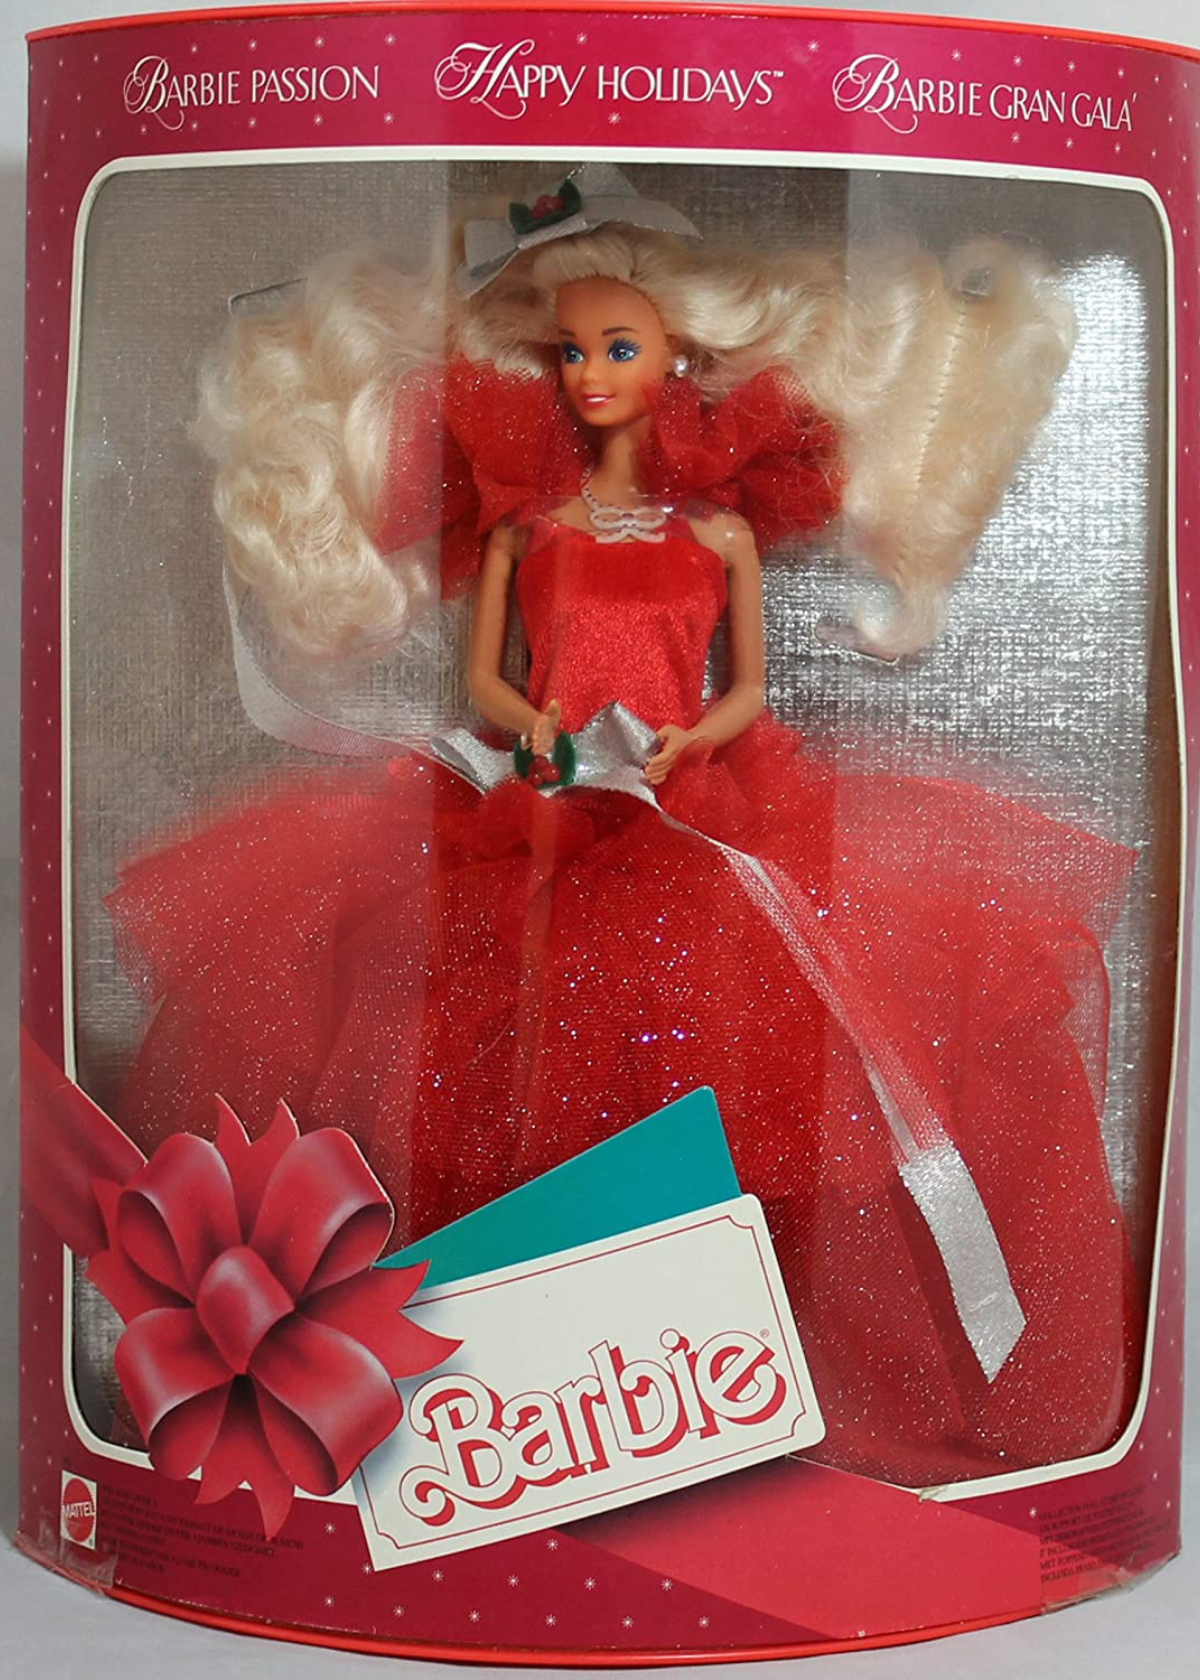 1988 Holiday Barbie for Sale! First Holiday Barbie Ever!